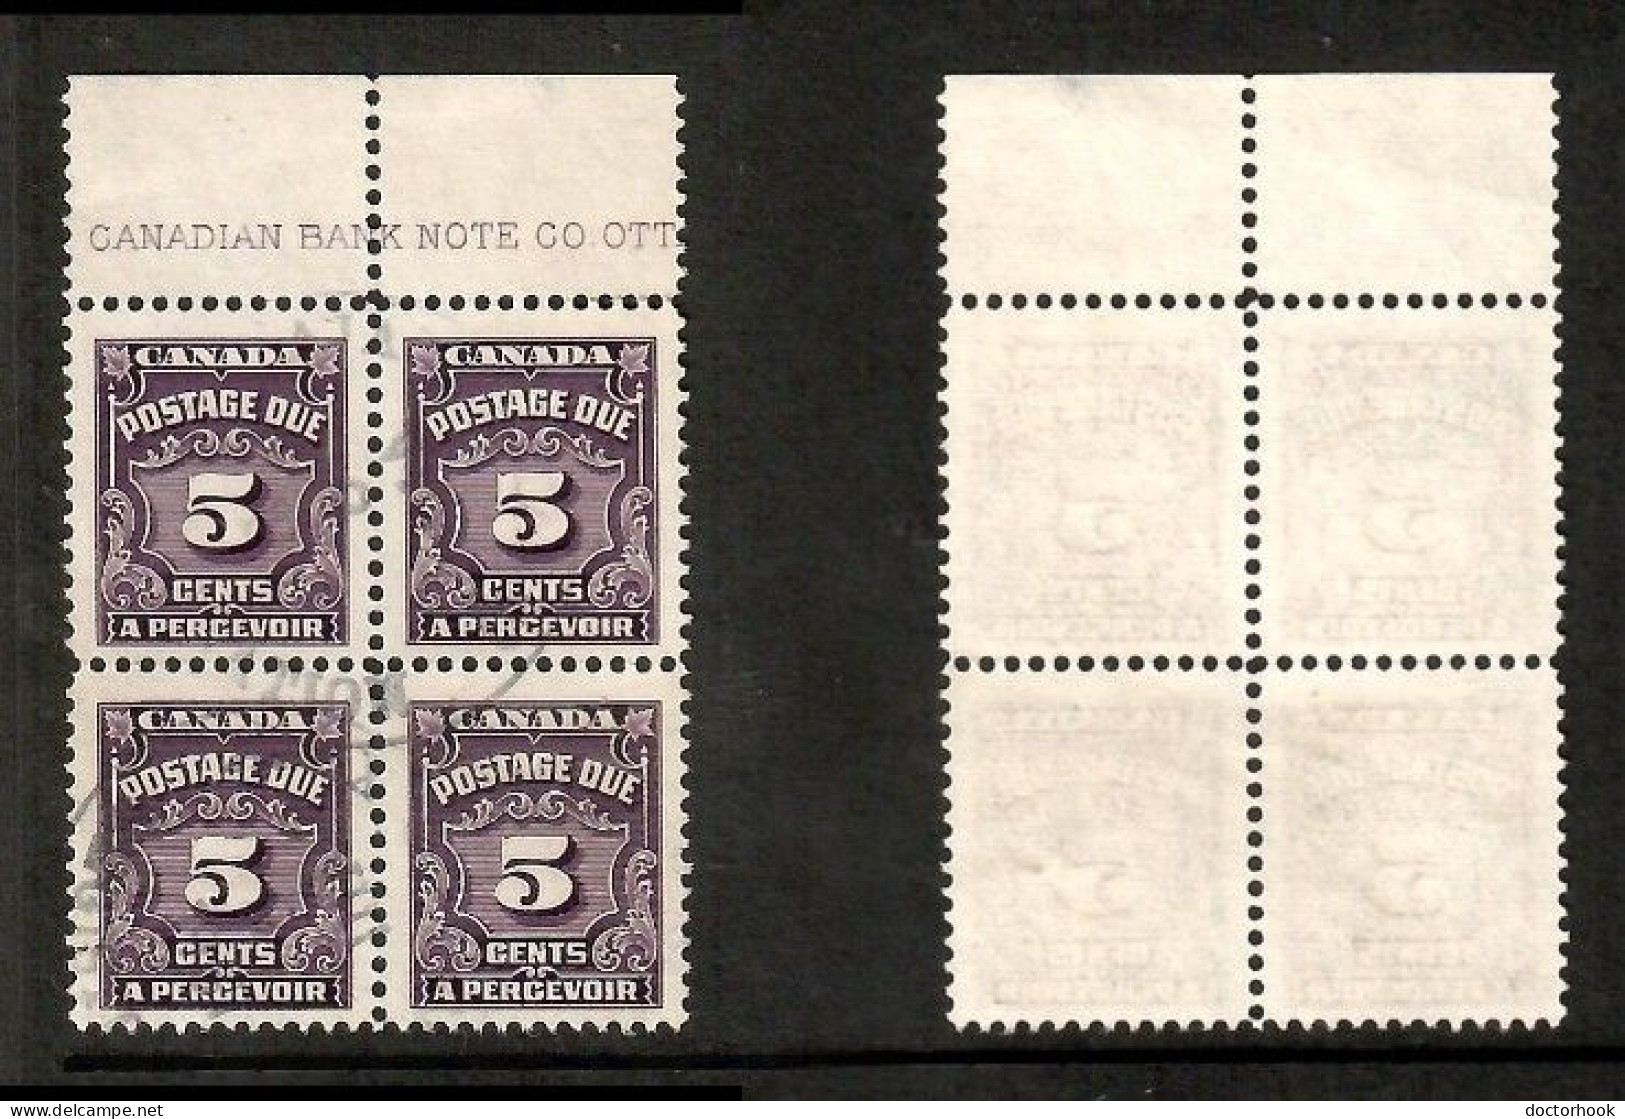 CANADA   Scott # J 18 USED BLOCK Of 4 W/TABS (CONDITION AS PER SCAN) (CAN-203) - Blocs-feuillets